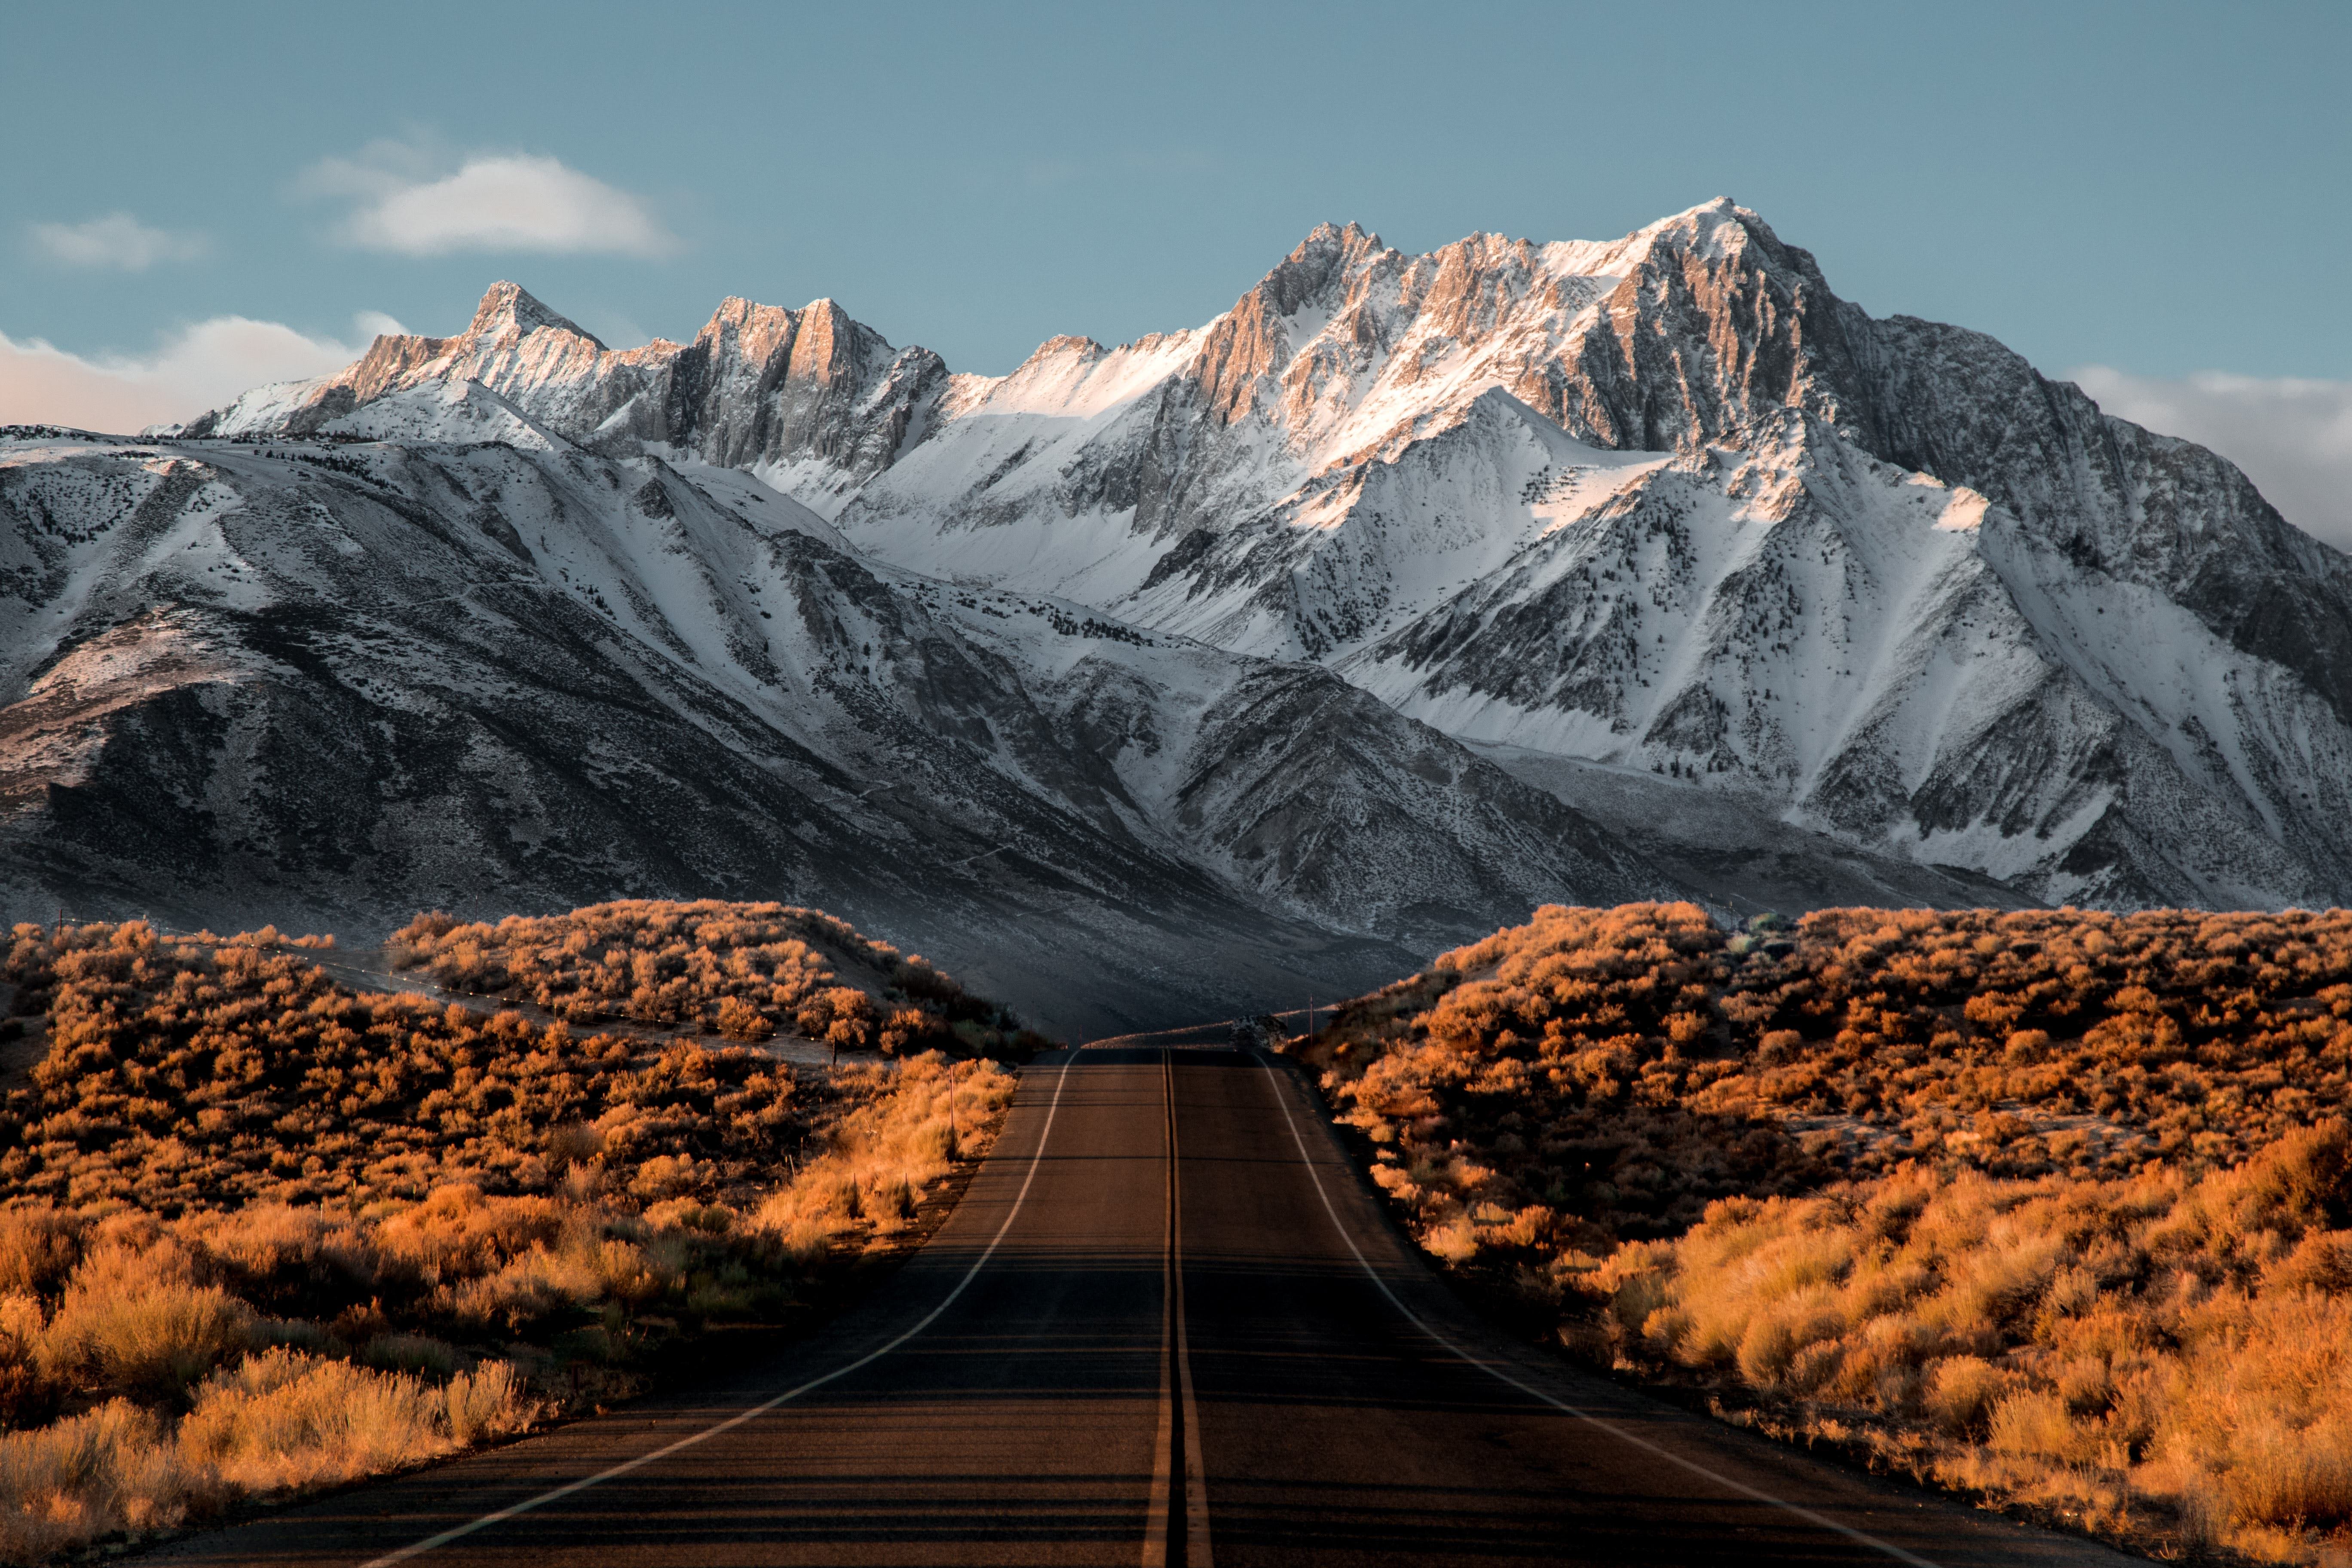 nevada wallpapers, photos and desktop backgrounds up to 8K [7680x4320